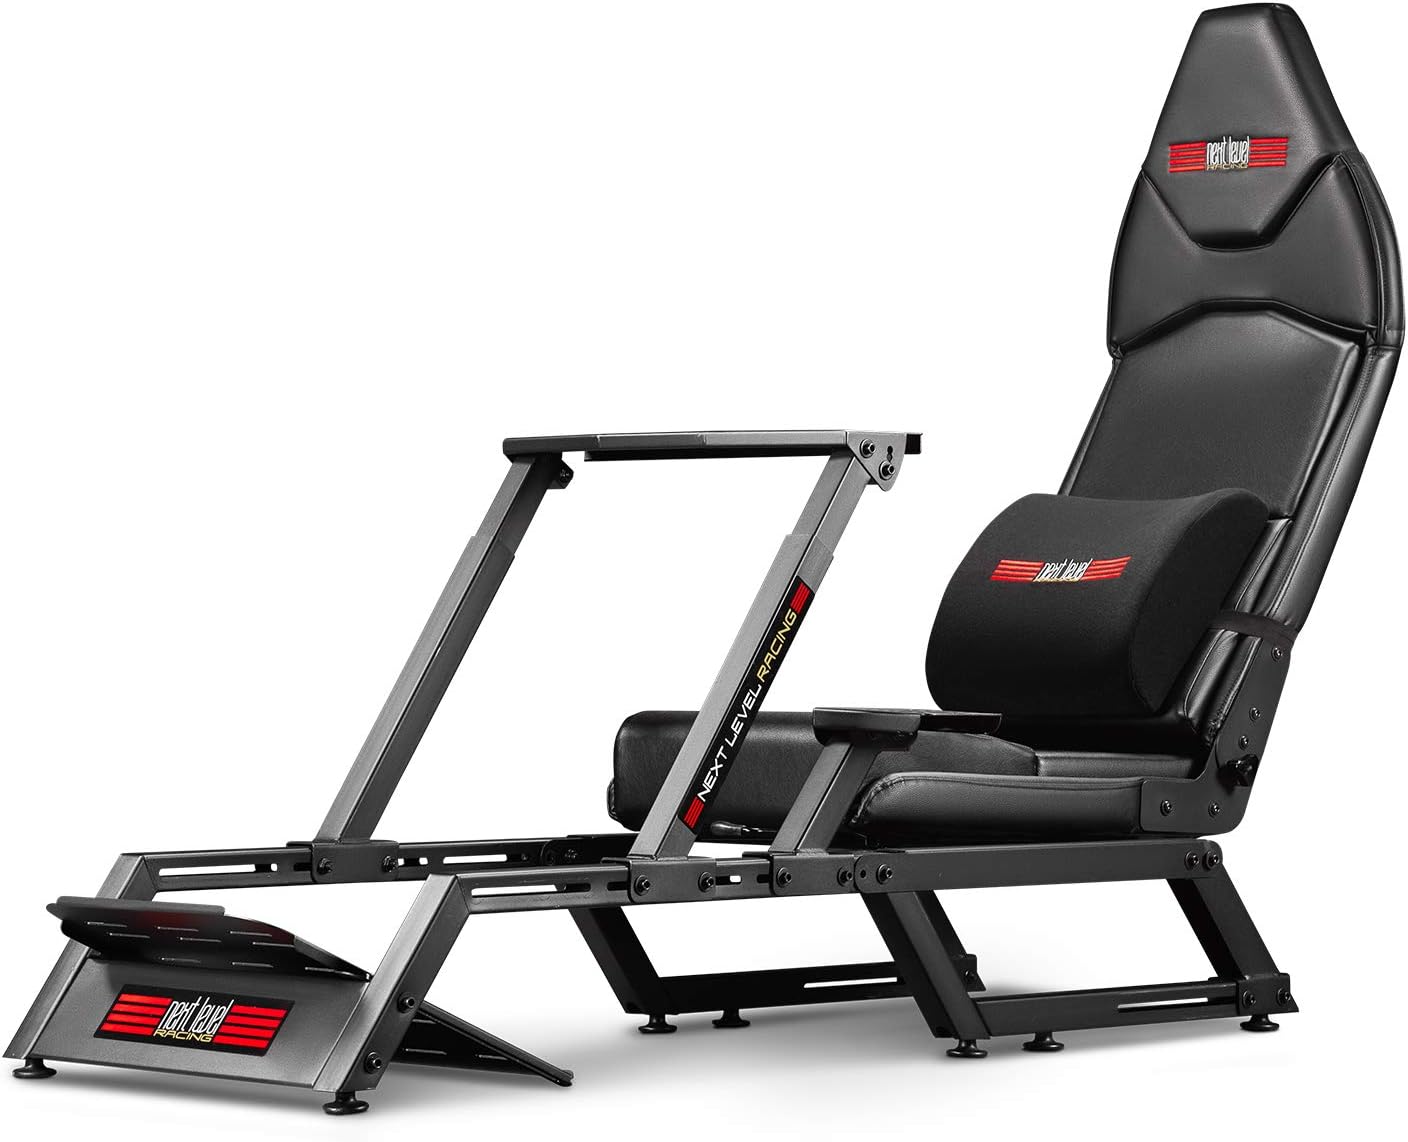 Next Level FGT Racing Simulator Cockpit - Includes Seat Slider, Gear Shifter Support, and Lumbar Cushion 0667380785820